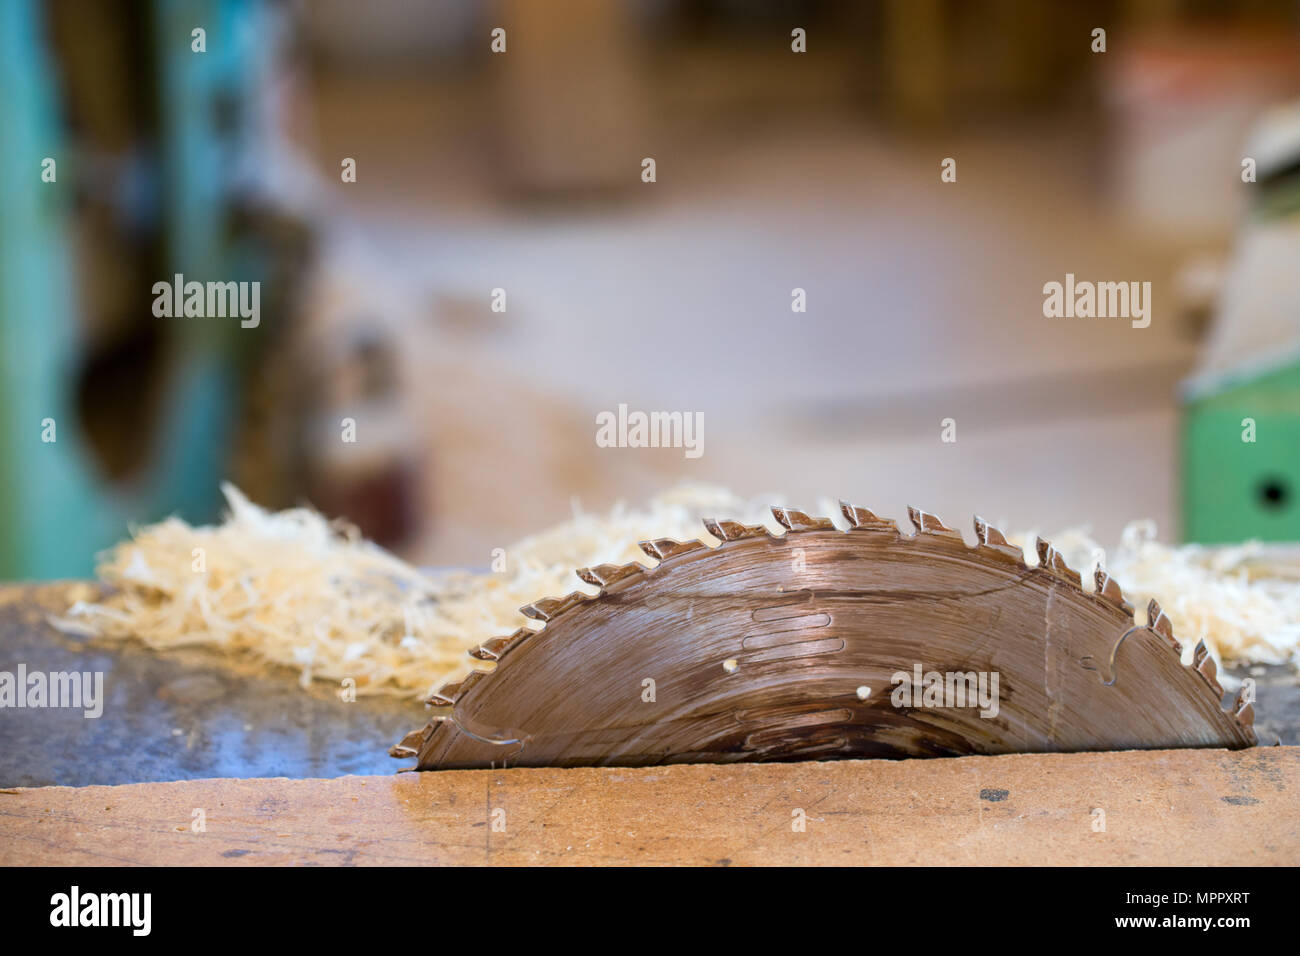 Carpenter tools on wooden table with sawdust. Circular Saw. Cutting a wooden plank Stock Photo